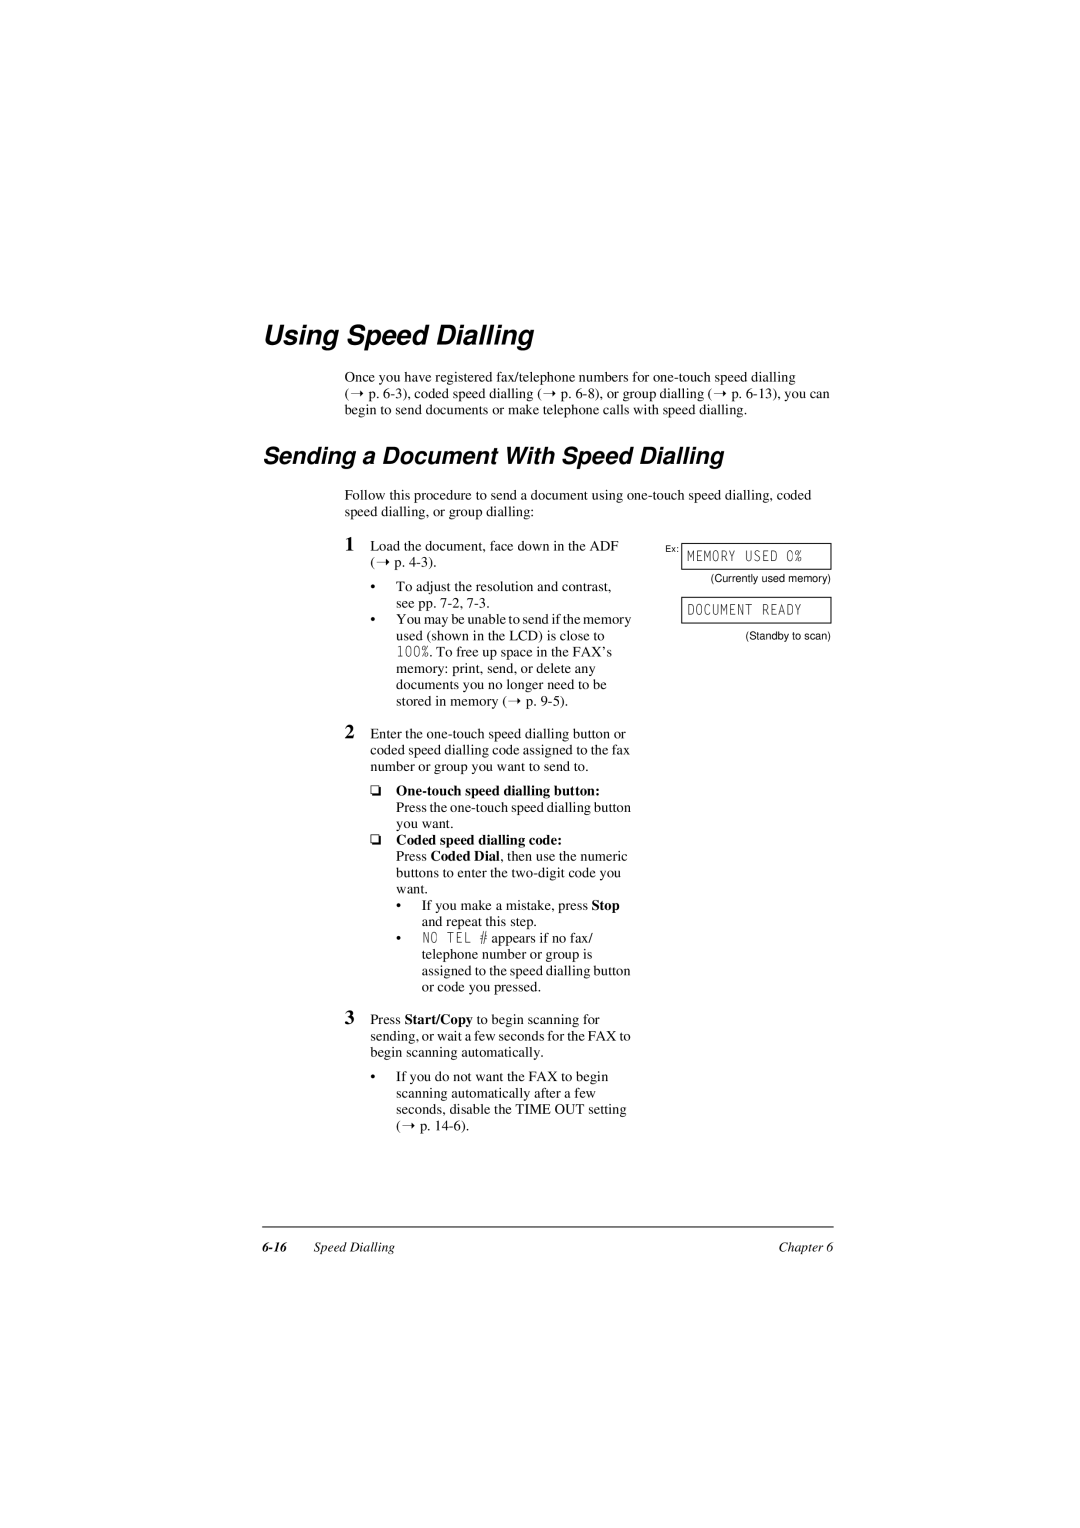 Canon L290, L240 manual Using Speed Dialling, Sending a Document With Speed Dialling, Coded speed dialling code 